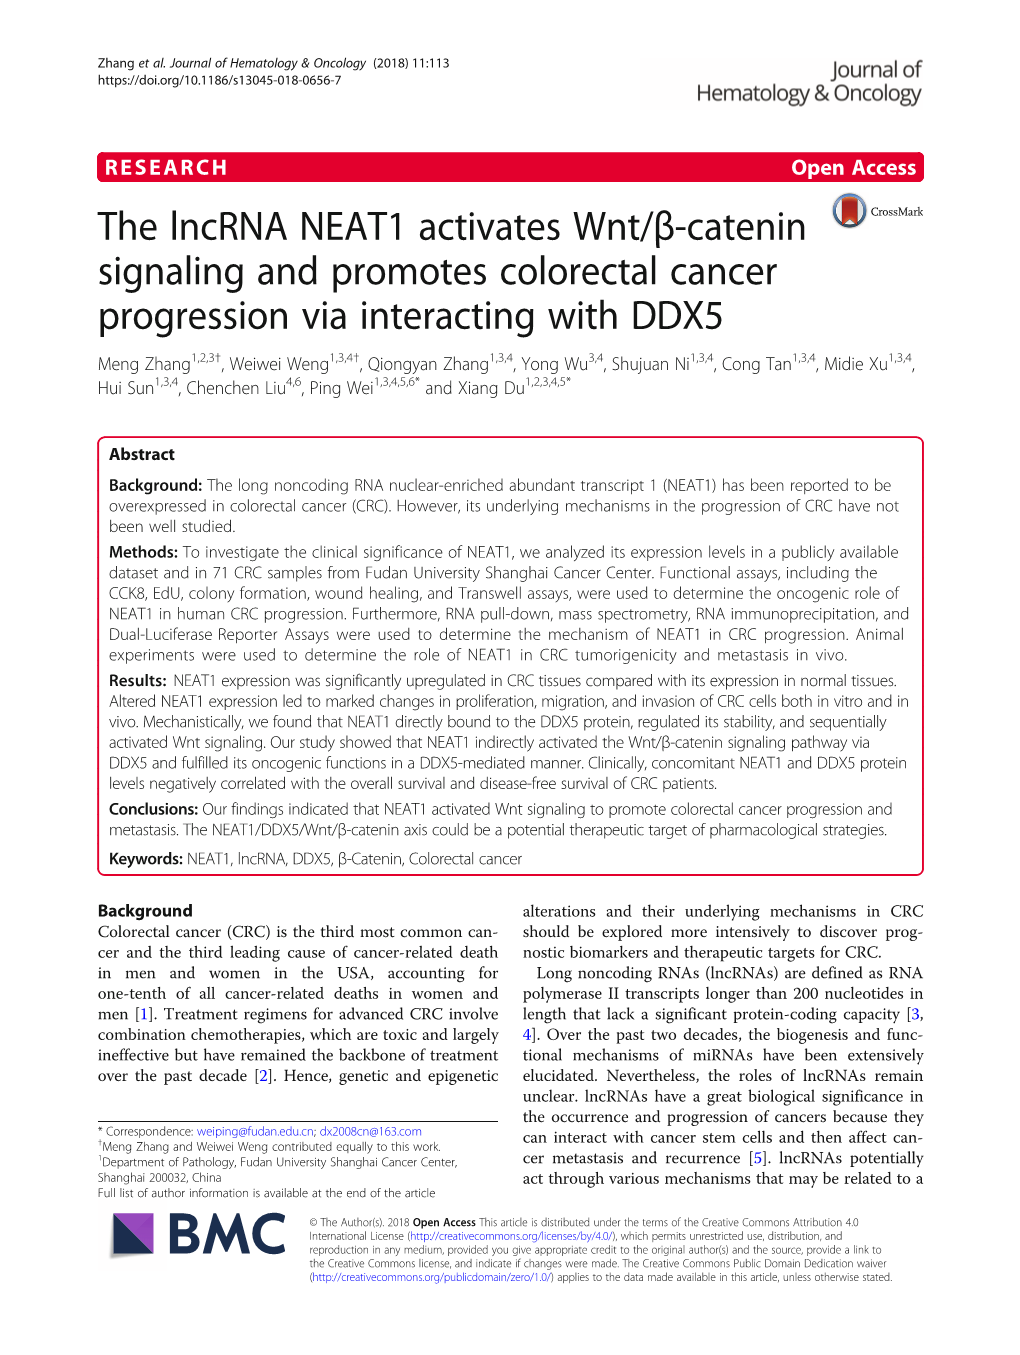 The Lncrna NEAT1 Activates Wnt/Β-Catenin Signaling and Promotes Colorectal Cancer Progression Via Interacting with DDX5